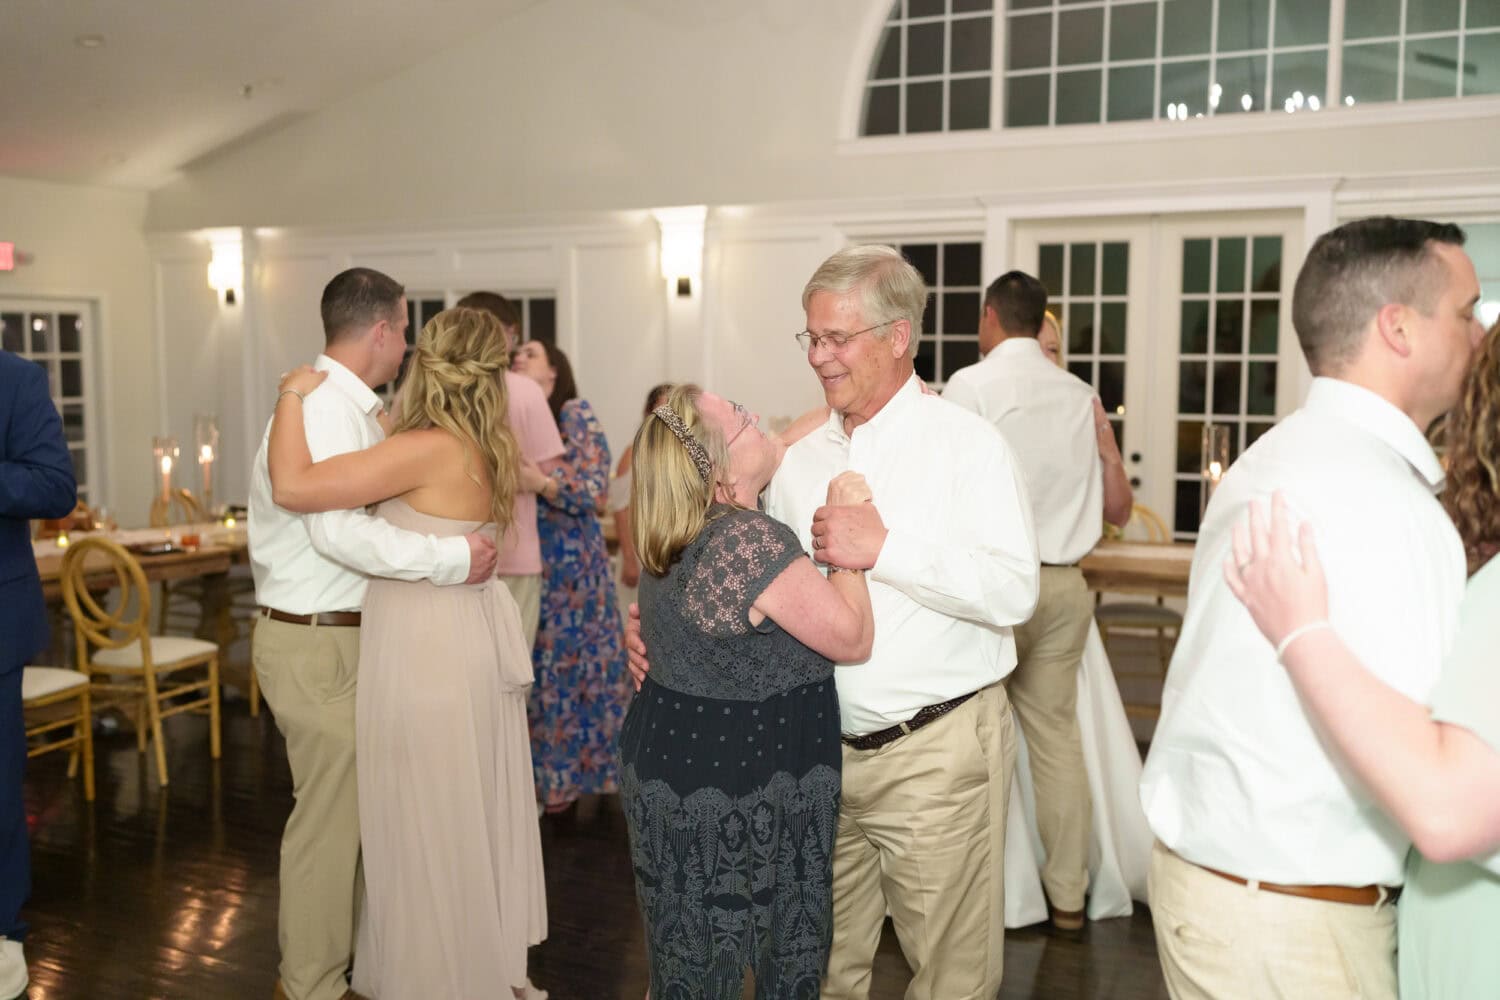 Dance time during the reception - The Village House at Litchfield